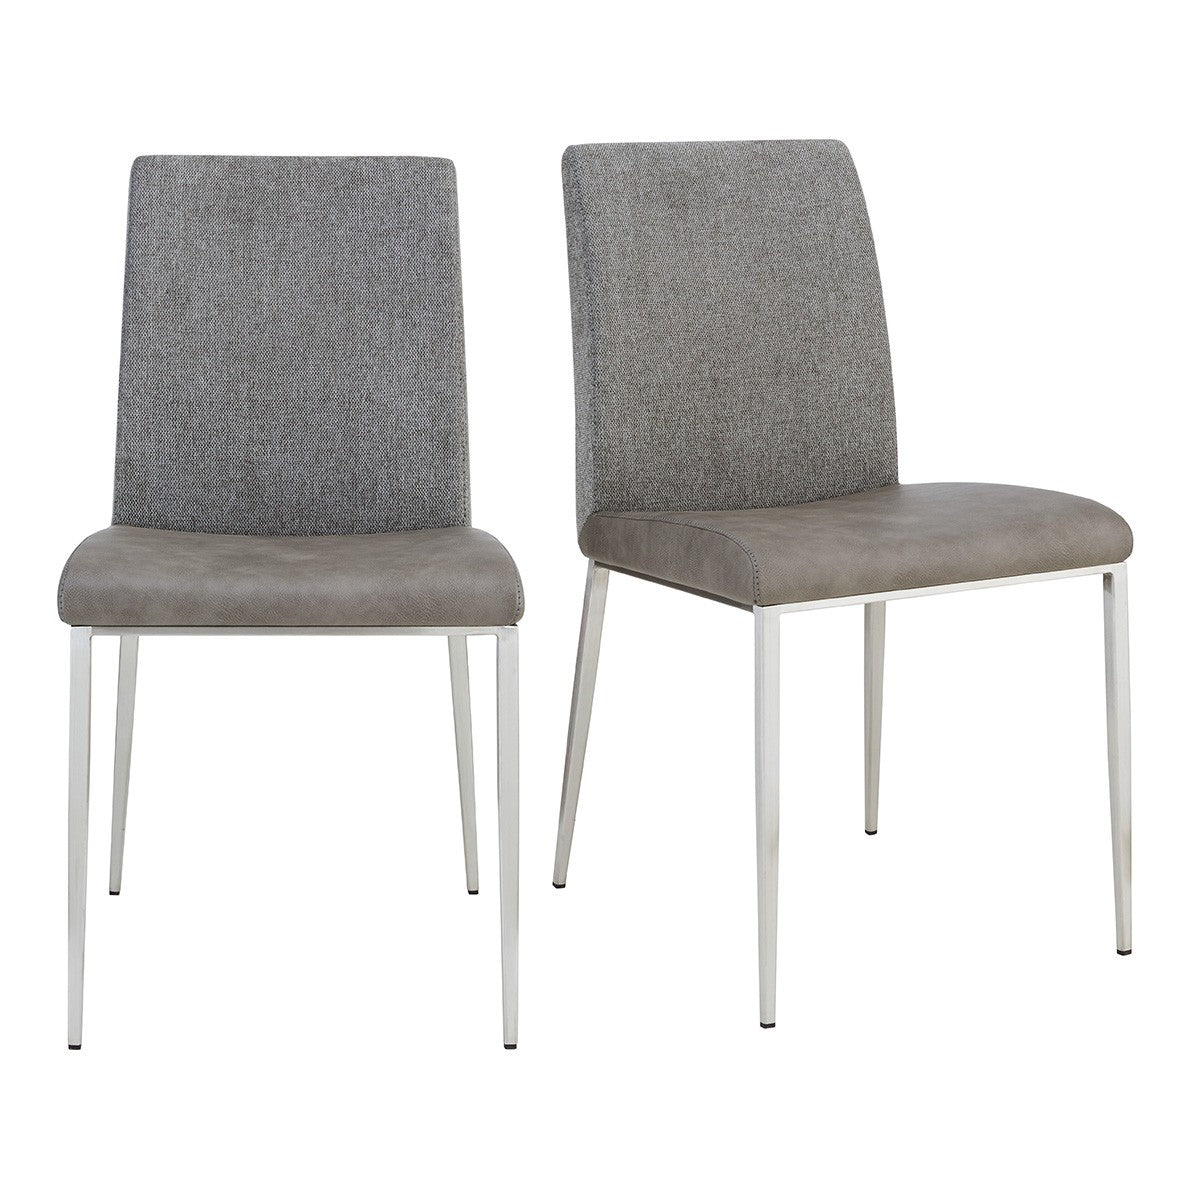 Set of Two Light Brown and Gray Stainless Steel Chairs